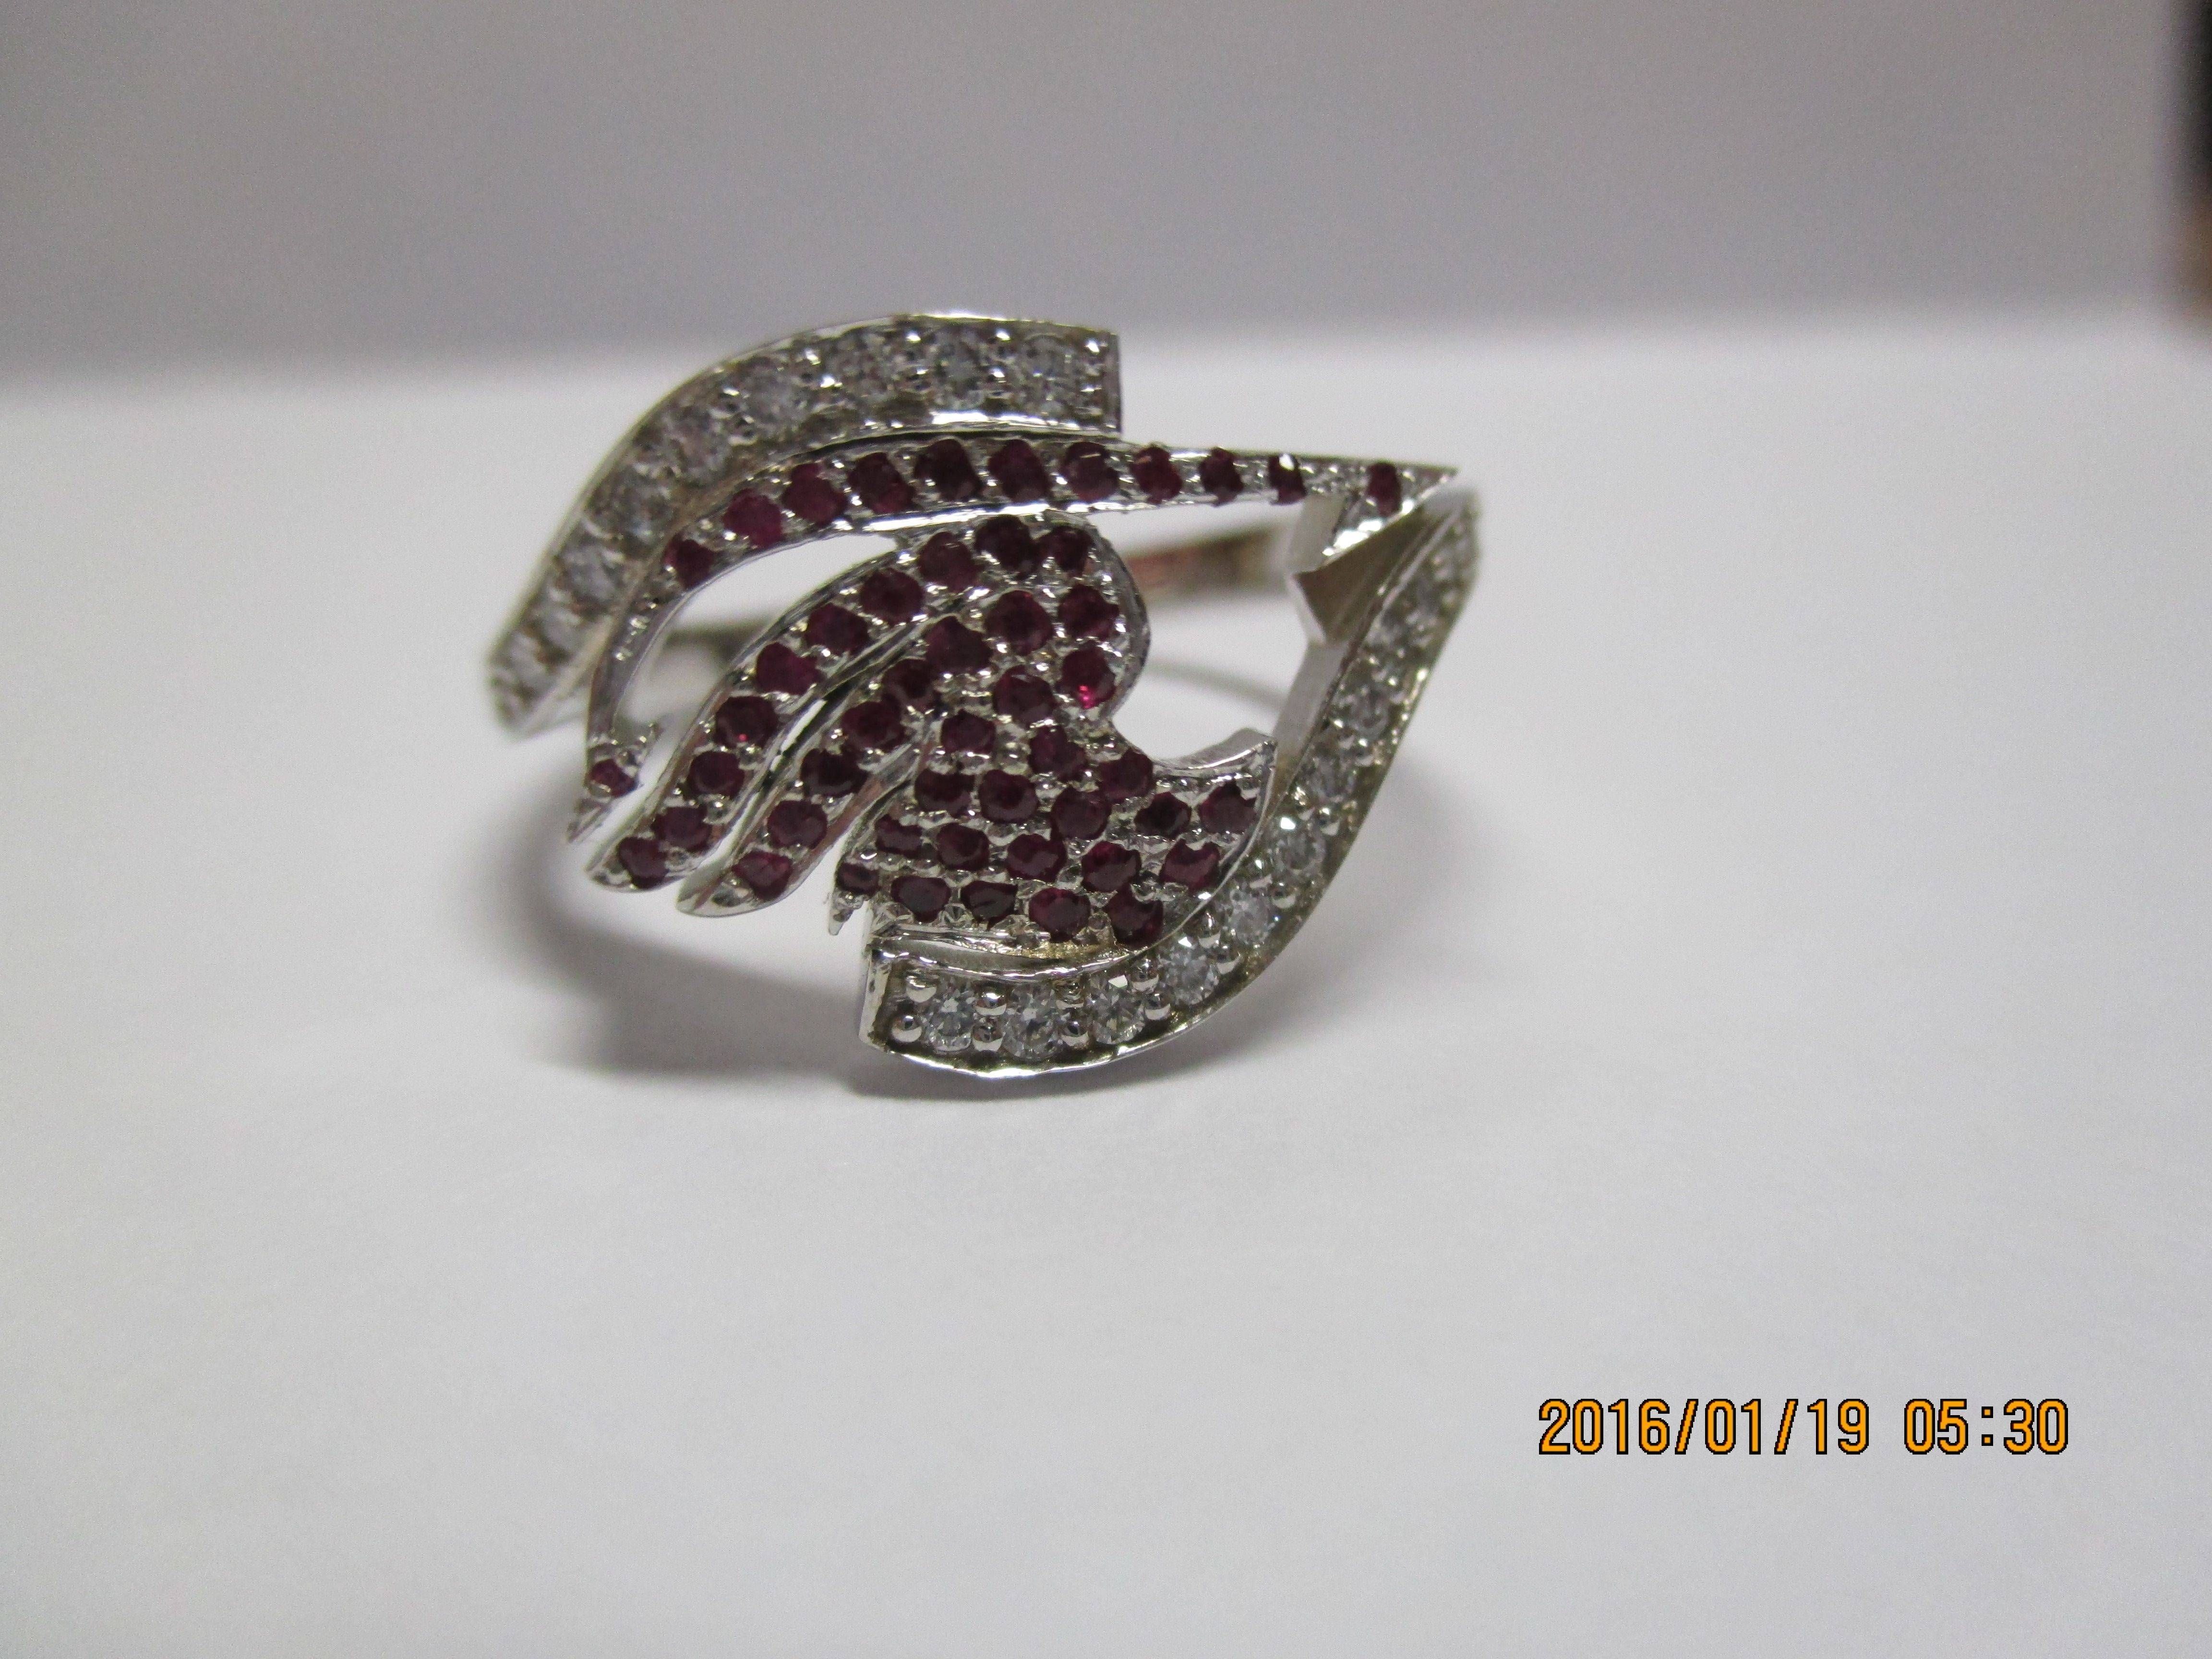 Buy A Hand Crafted Erza Skarlet Fairy Tail Anime Engagement Ring With Regard To Hand Crafted Engagement Rings (View 11 of 15)